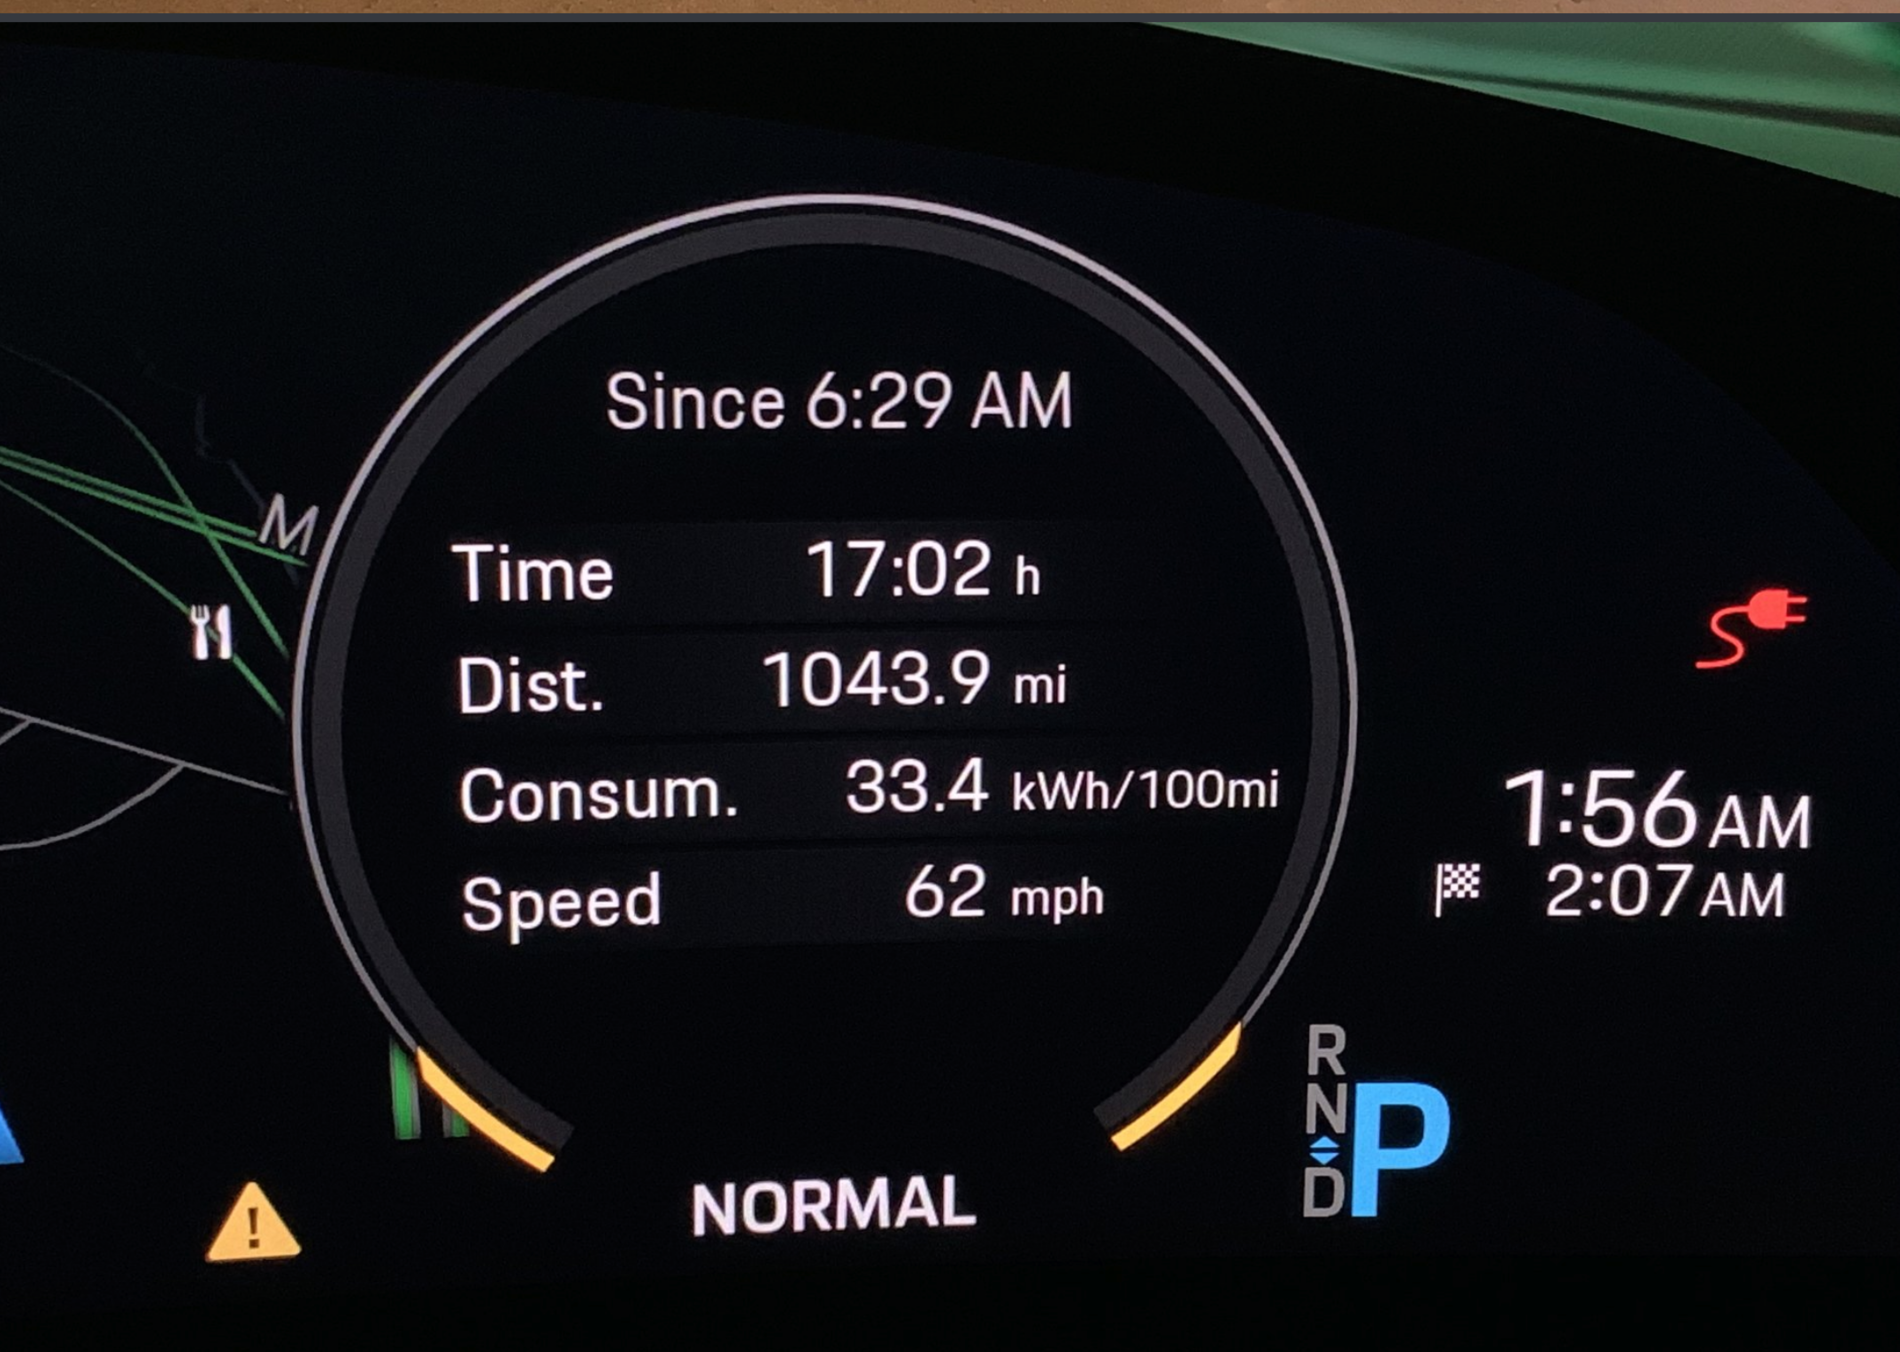 Ford Mustang Mach-E EPA Range for Porsche Taycan is 201 Miles Screen Shot 2020-03-15 at 5.28.39 PM